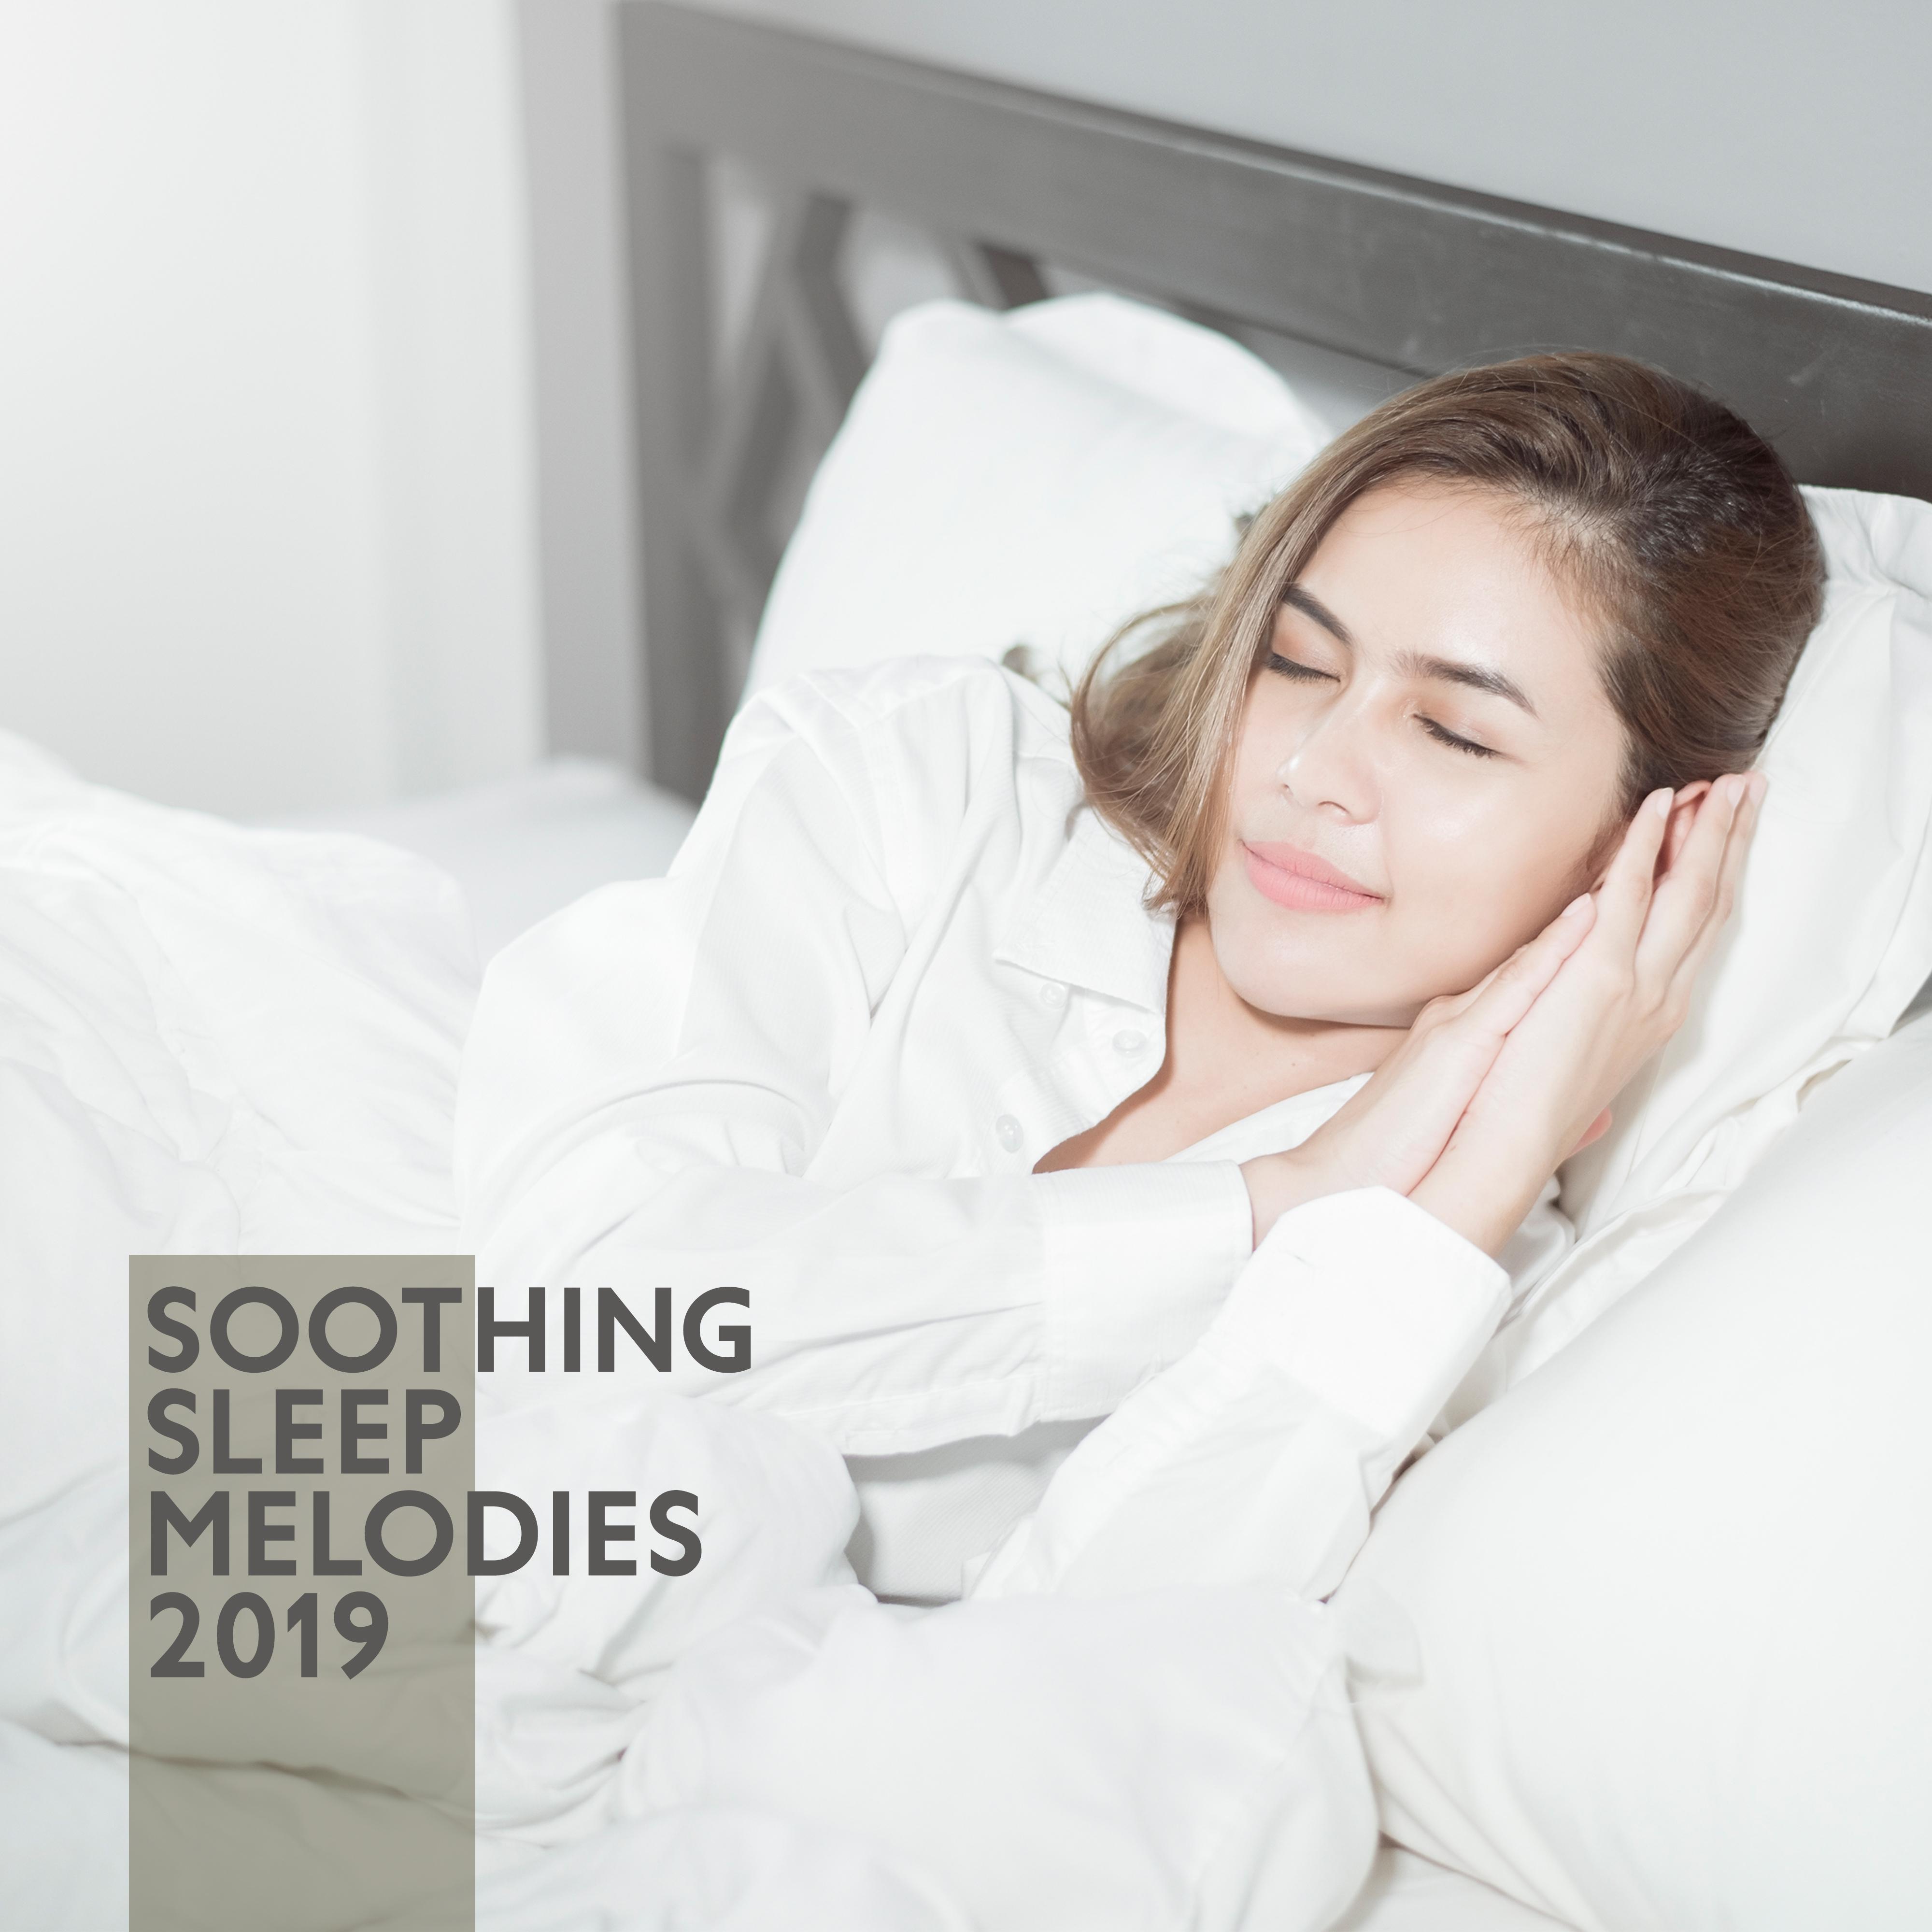 Soothing Sleep Melodies 2019  Calming Sounds for Deeper Sleep, Relaxation, Meditation, Zen Lounge, Pure Therapy, Music for Mind